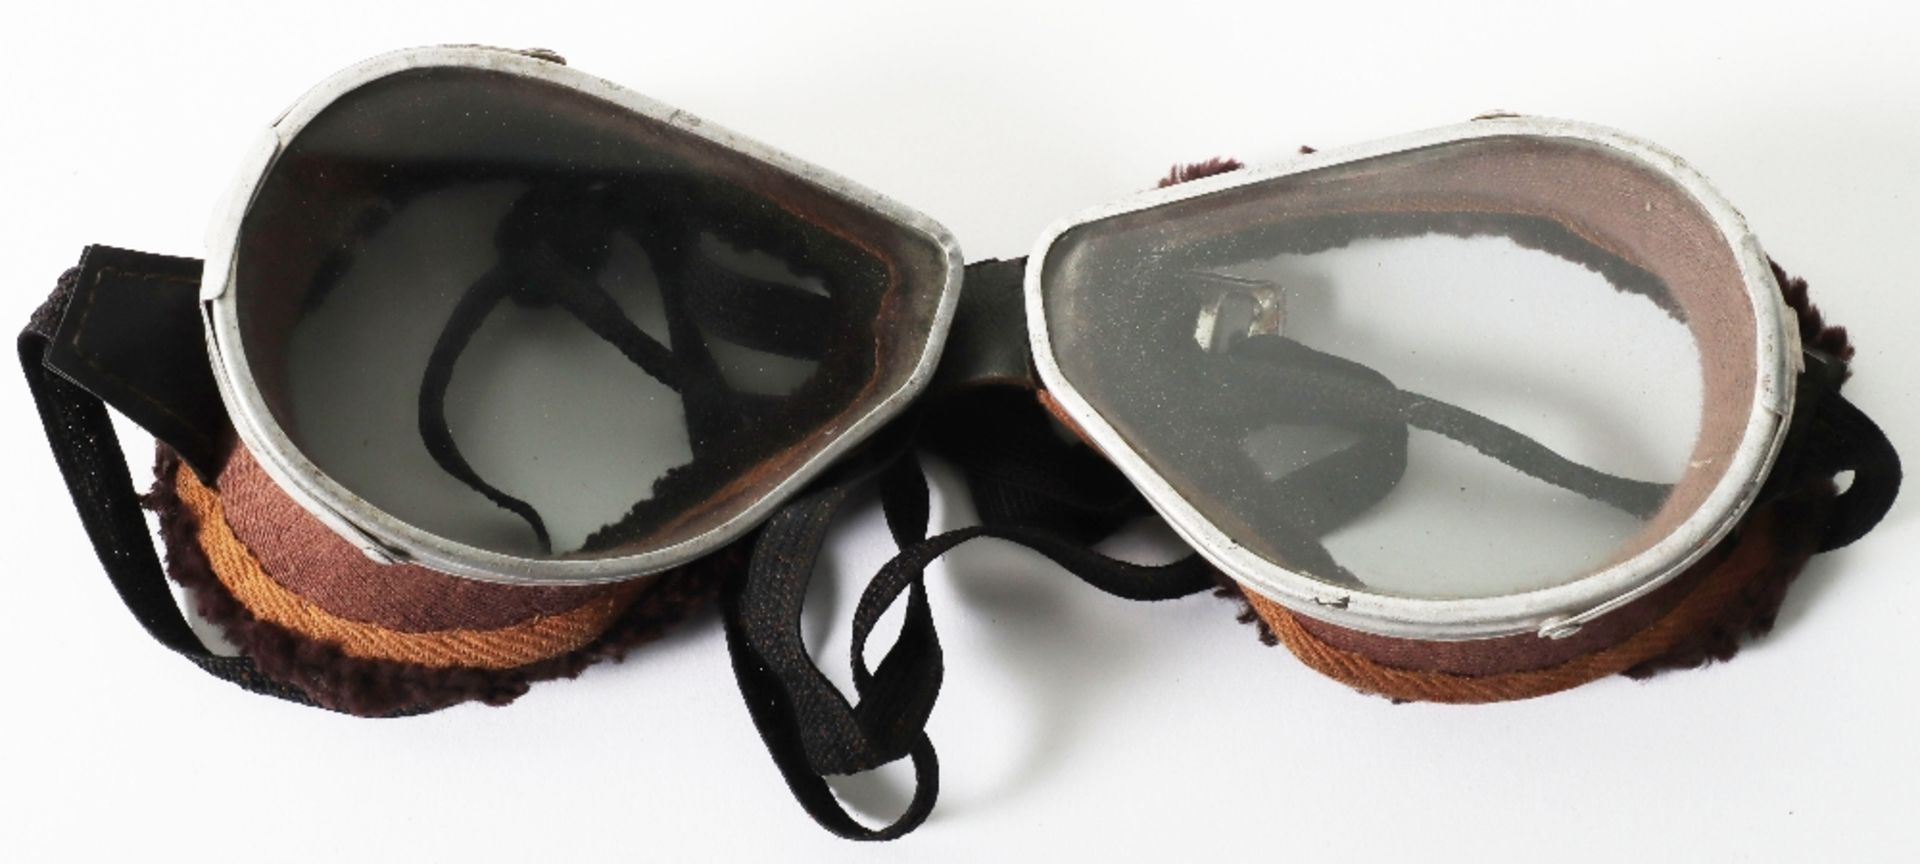 Five Pairs of Aviators Flying Goggles - Image 6 of 9